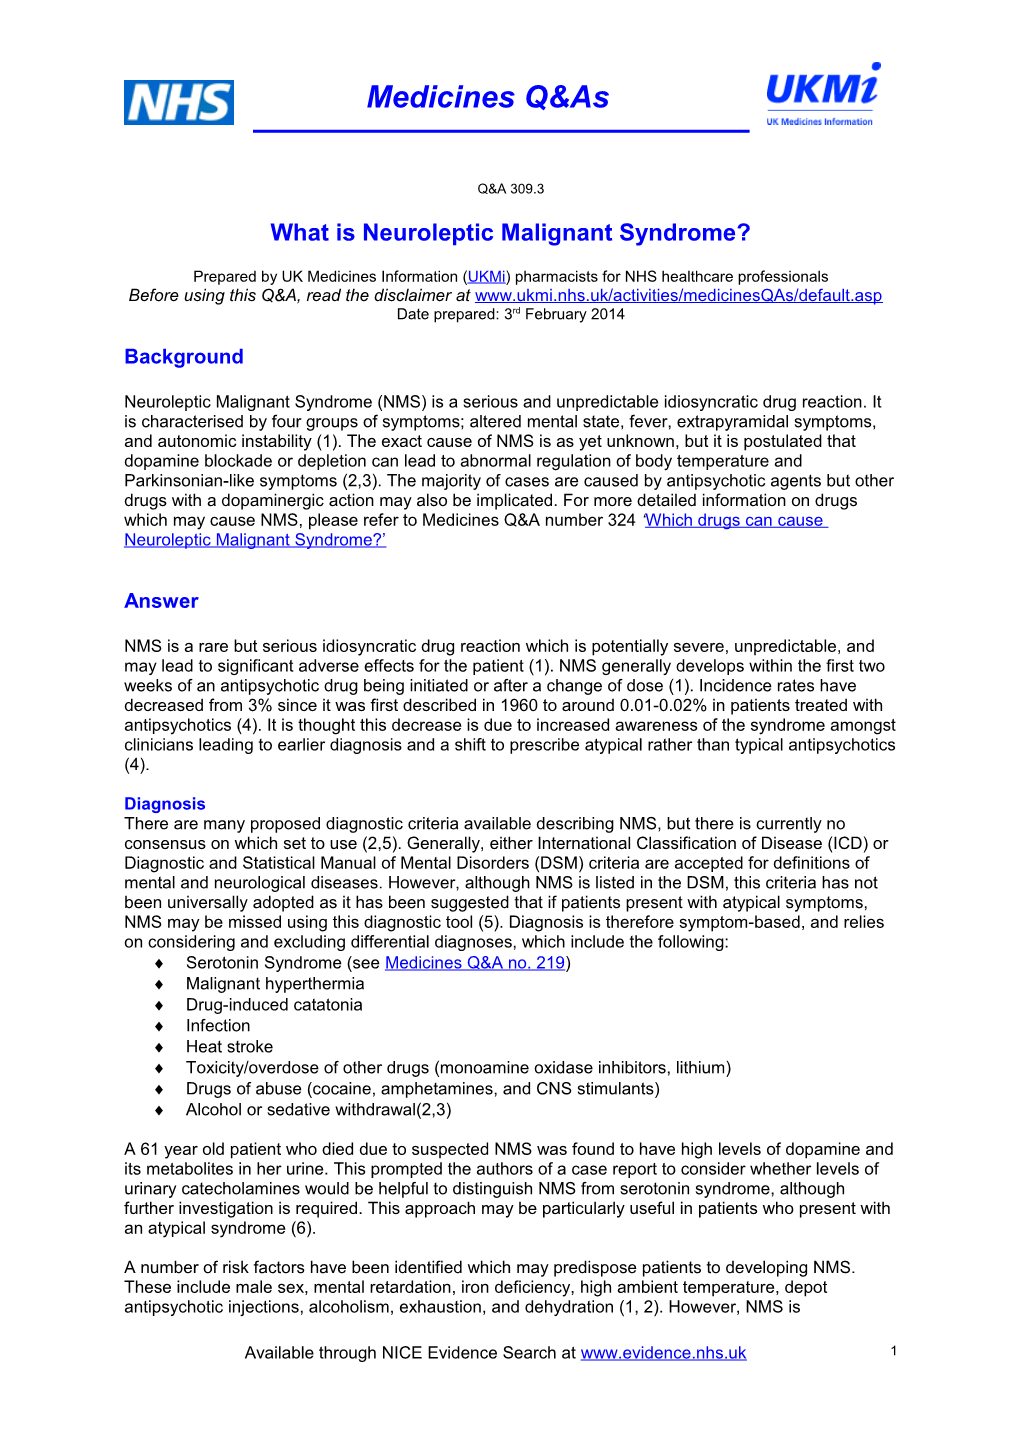 What Is Neuroleptic Malignant Syndrome?